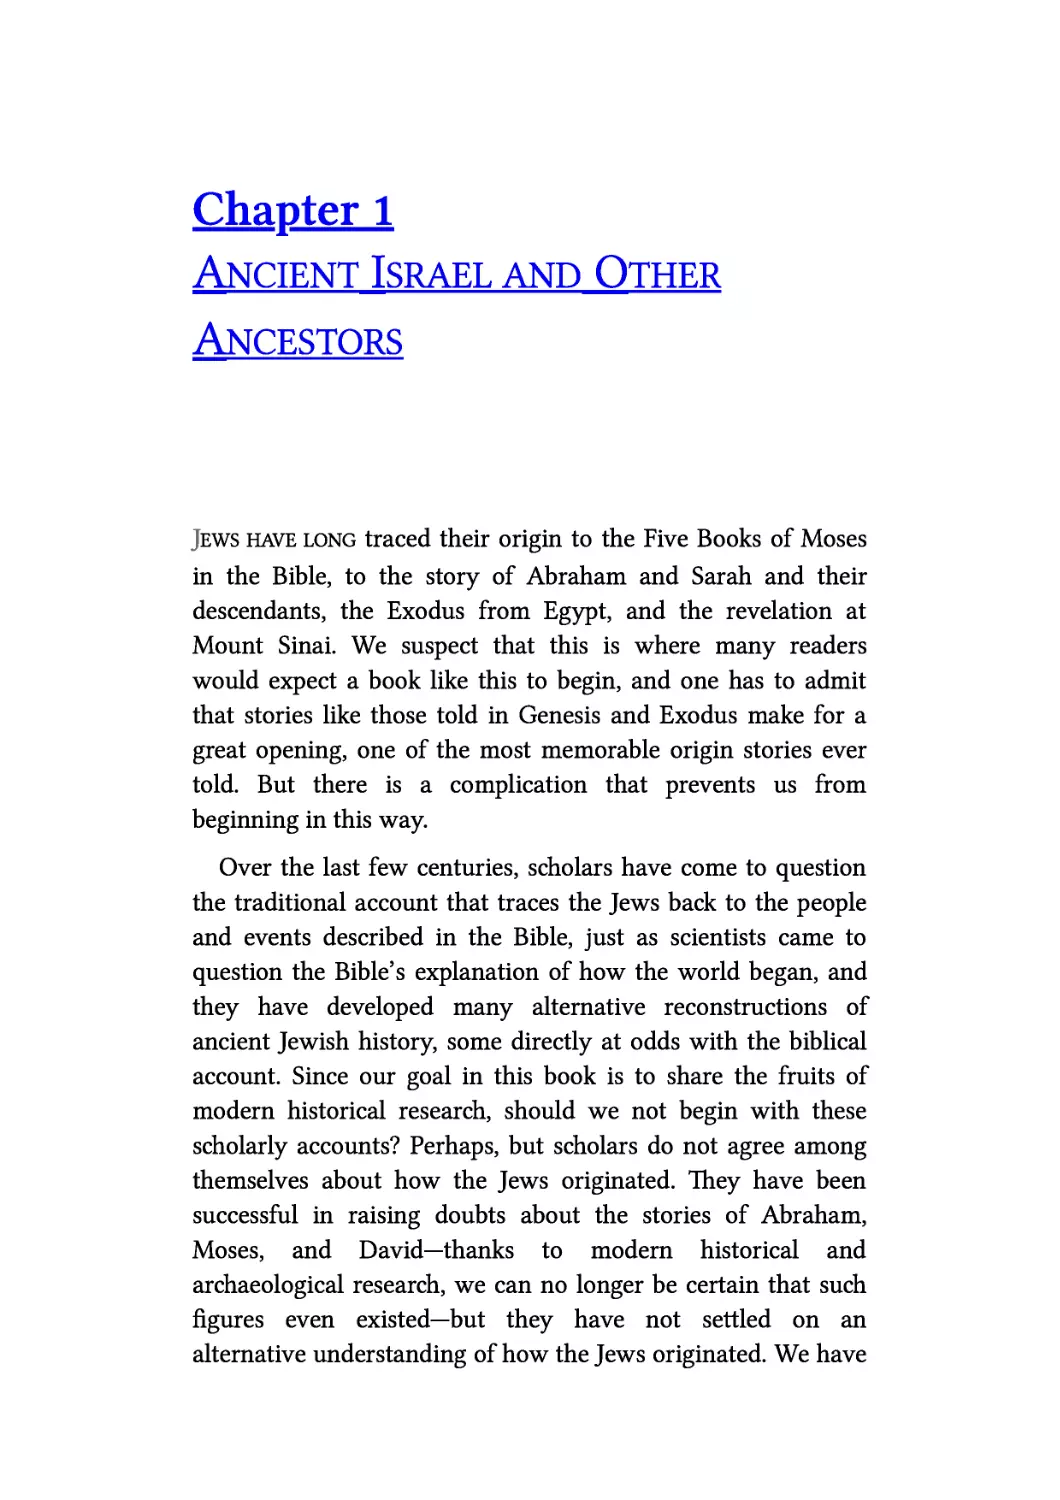 1. Ancient Israel and Other Ancestors